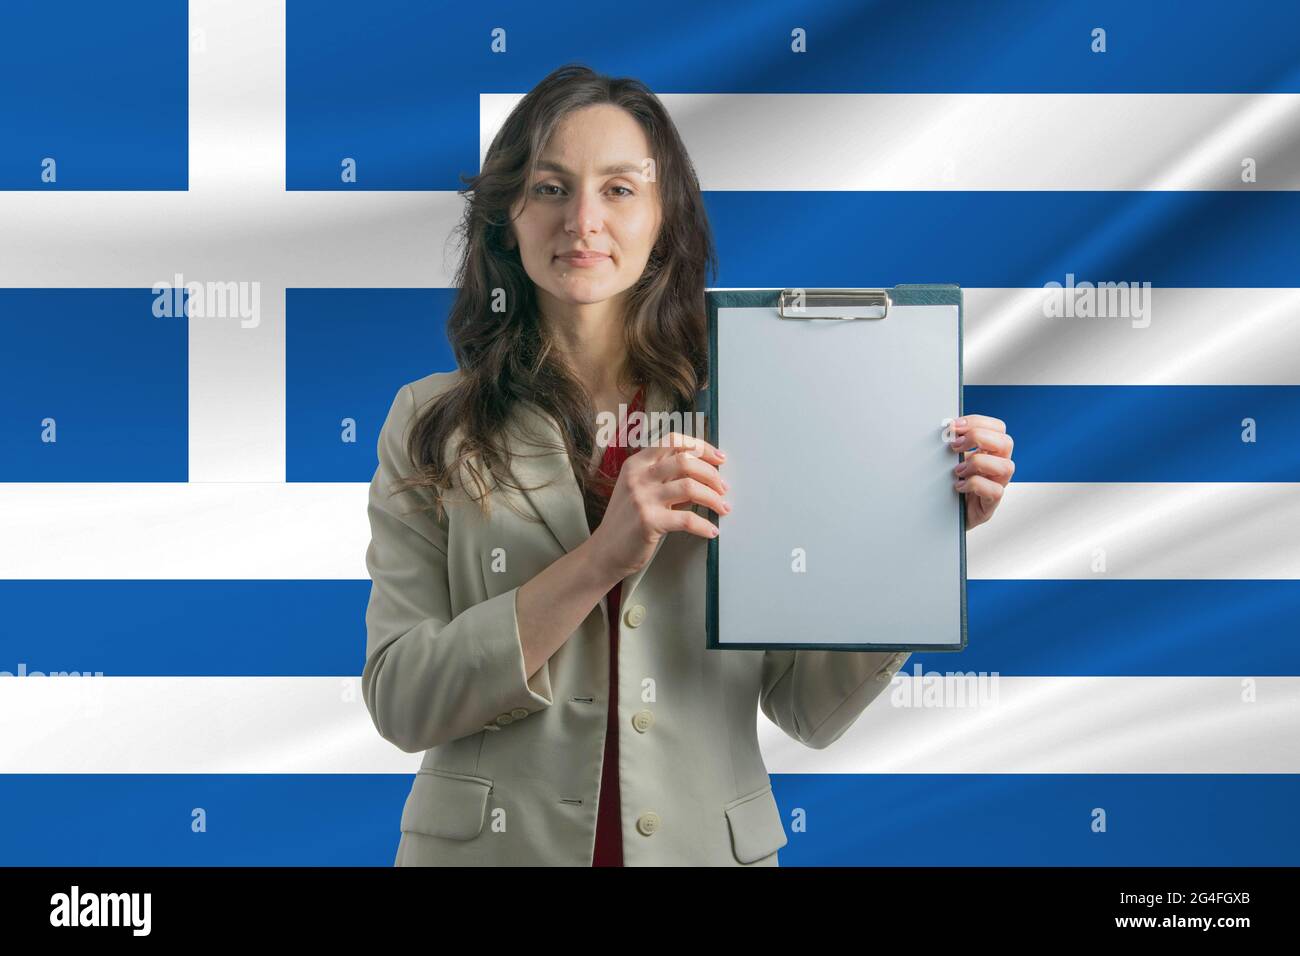 Study in Greece. Beautiful woman holding a sheet of paper in her hands. Girl on the background of the flag of Greece. Stock Photo